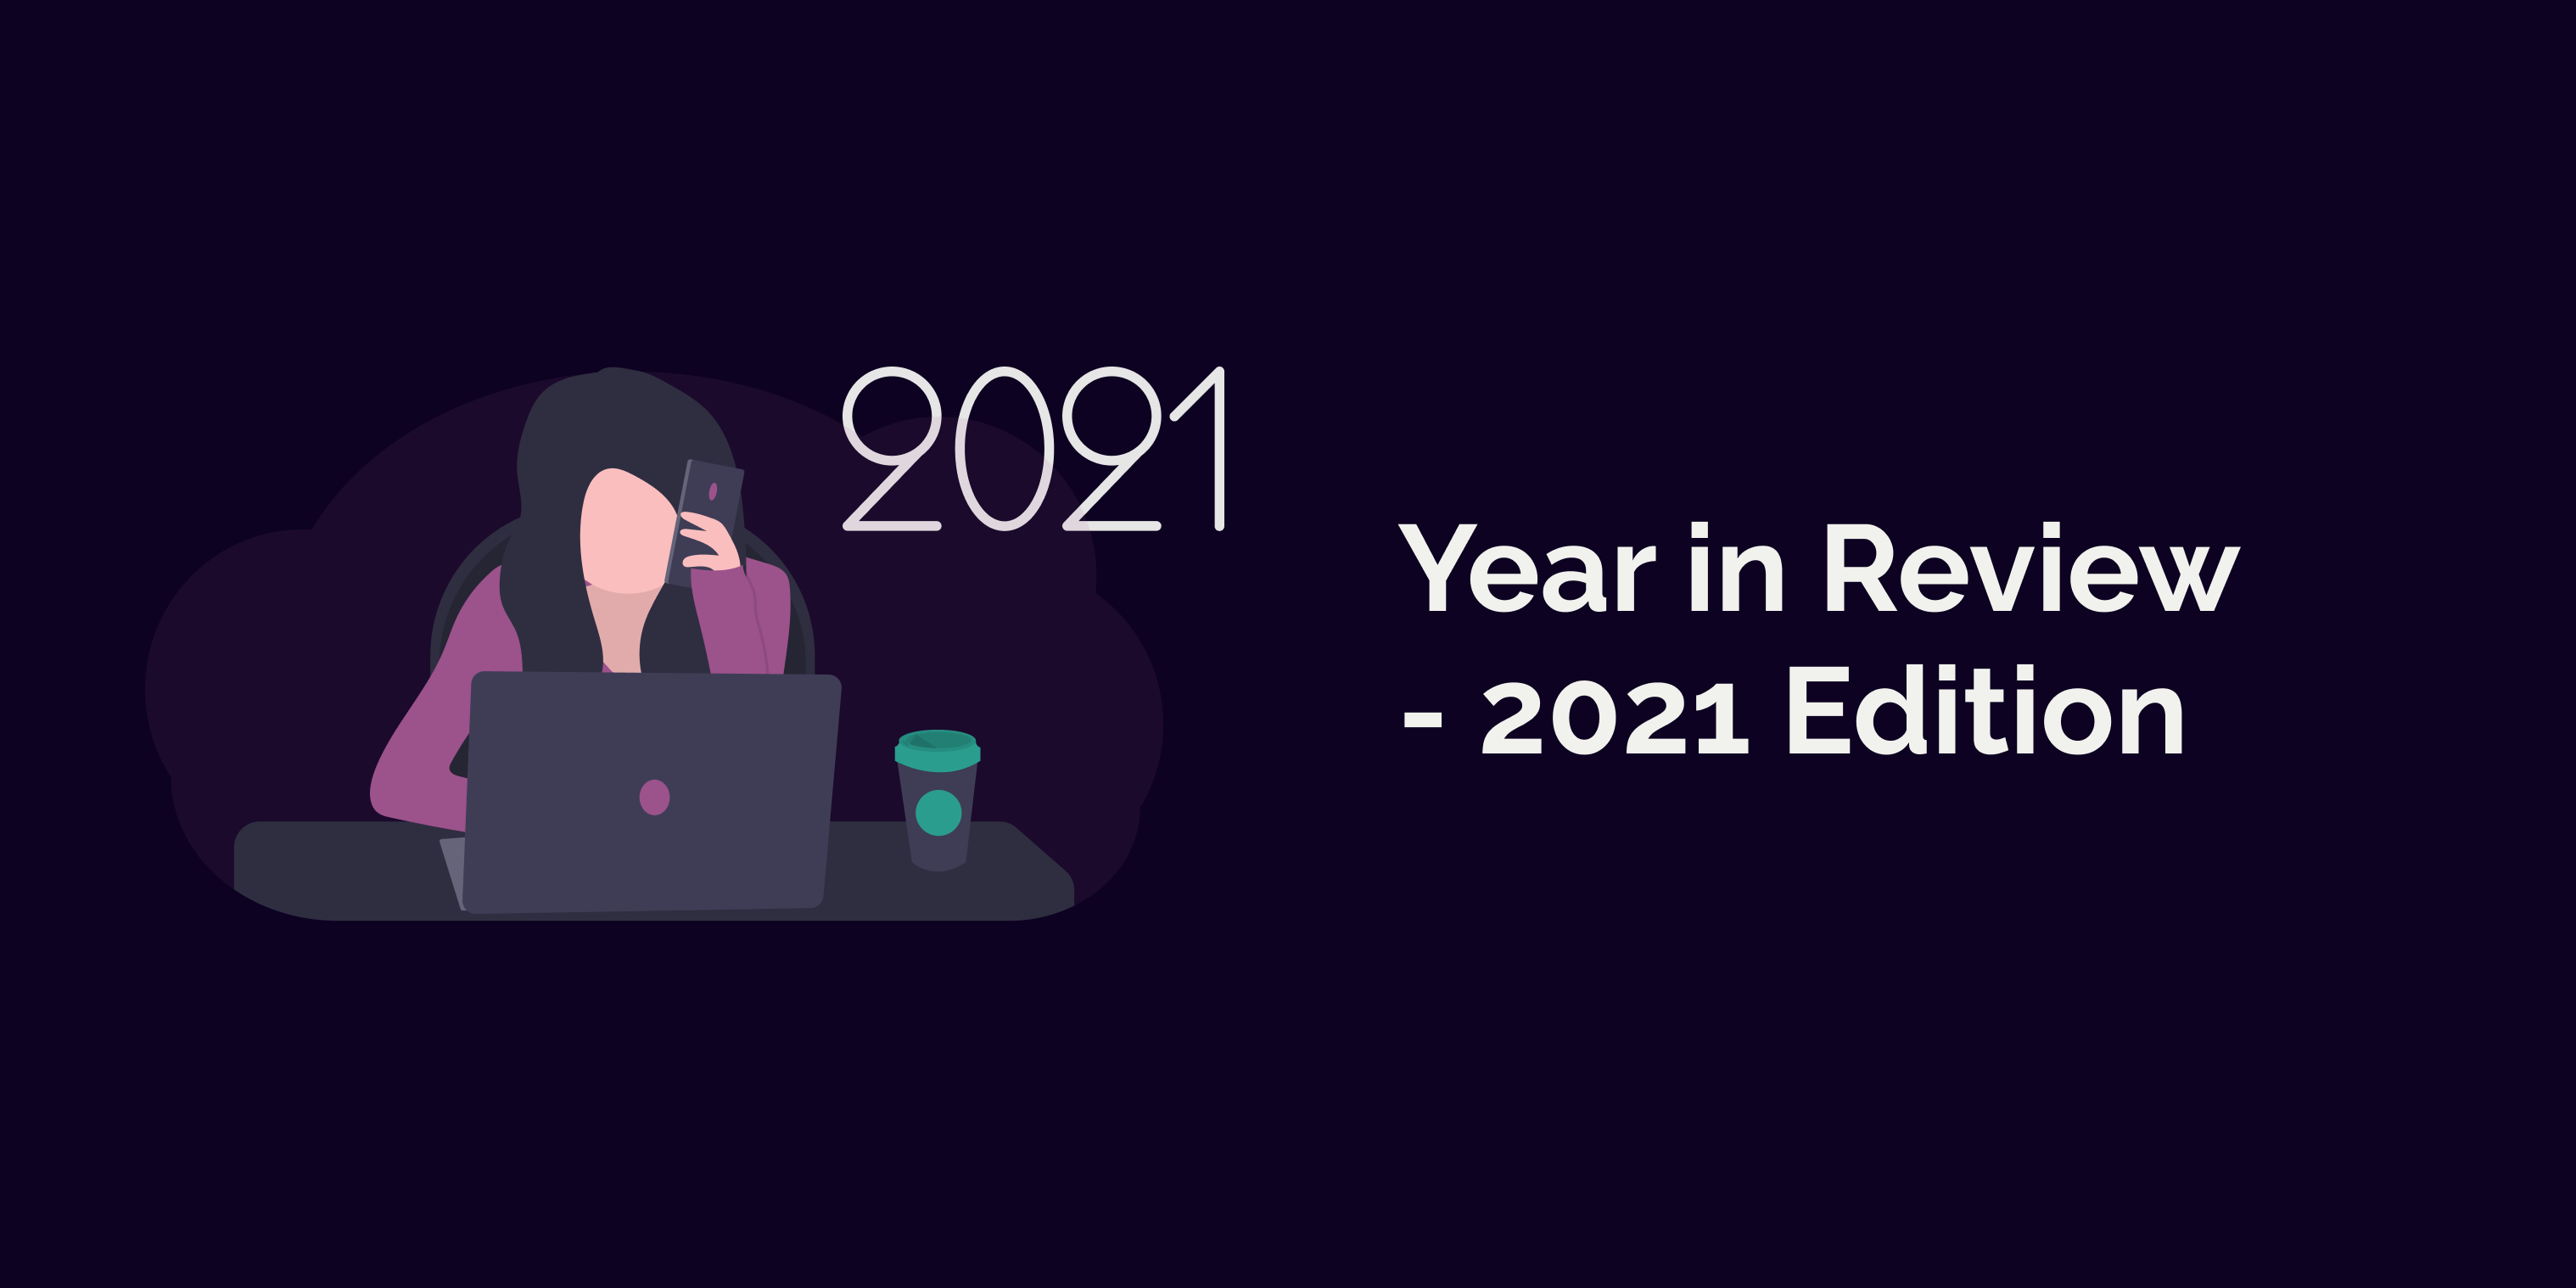 Year in Review - 2021 Edition. Illustration has a woman talking to a phone and looking at her computer. It also has the year 2021 written in the top right corner.